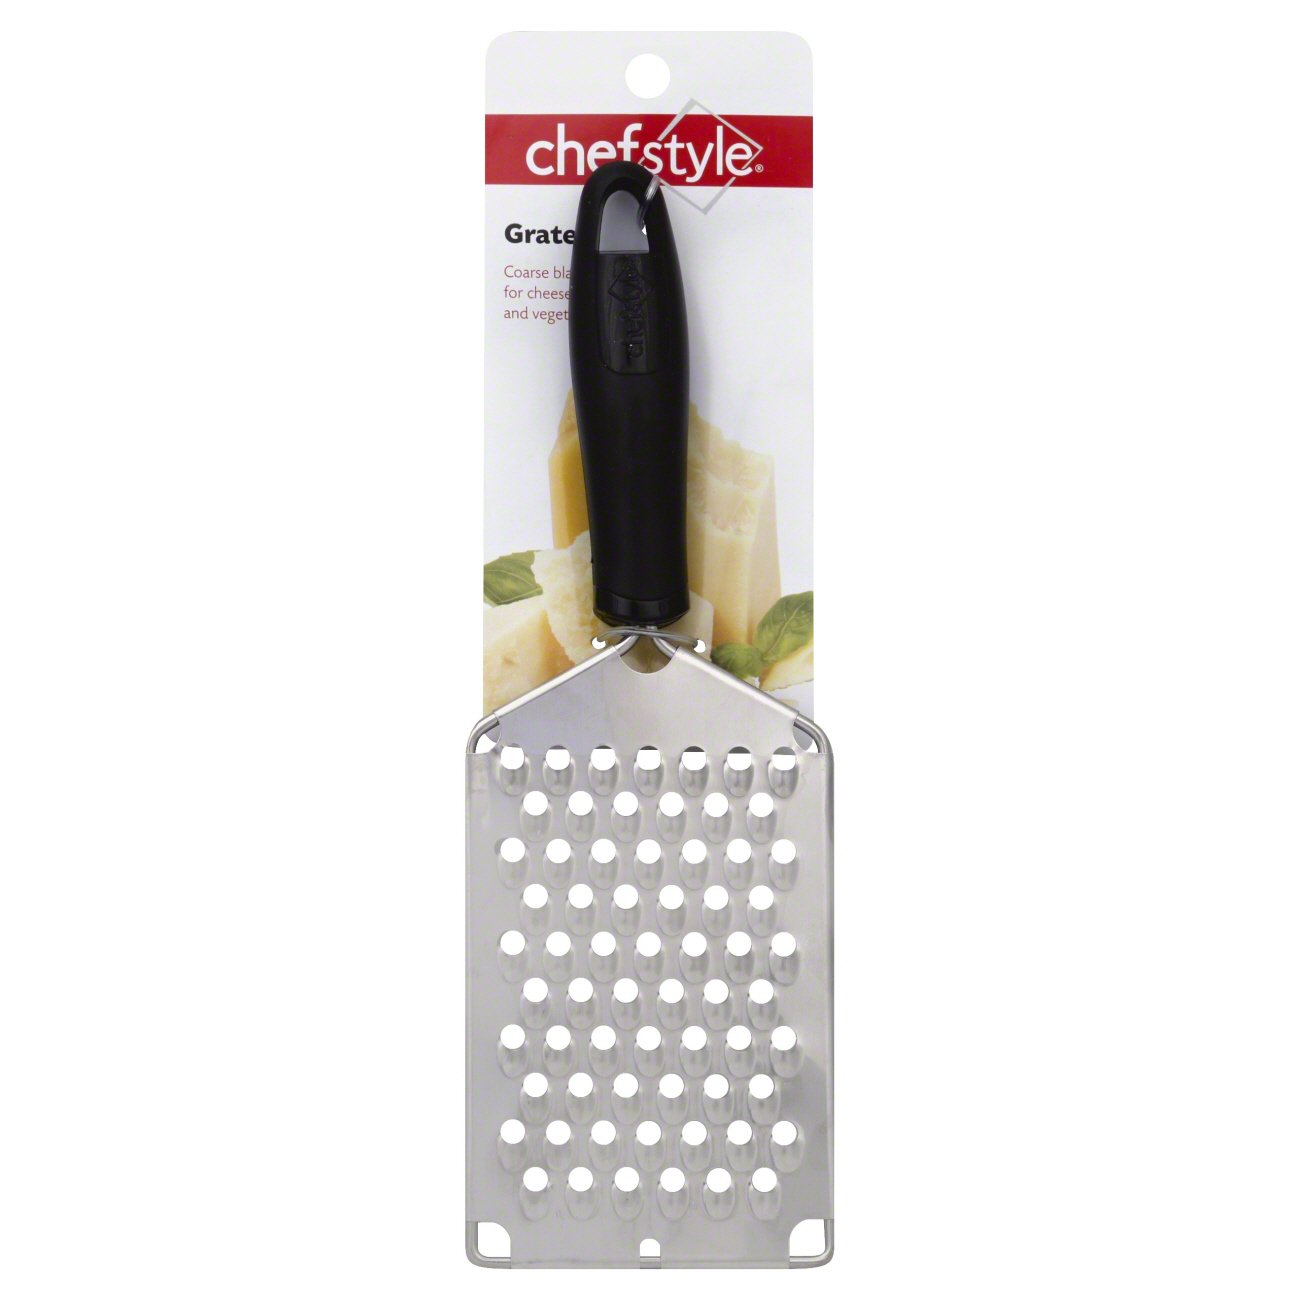 chefstyle Stainless Steel Hand Grater - Shop Utensils & Gadgets at H-E-B